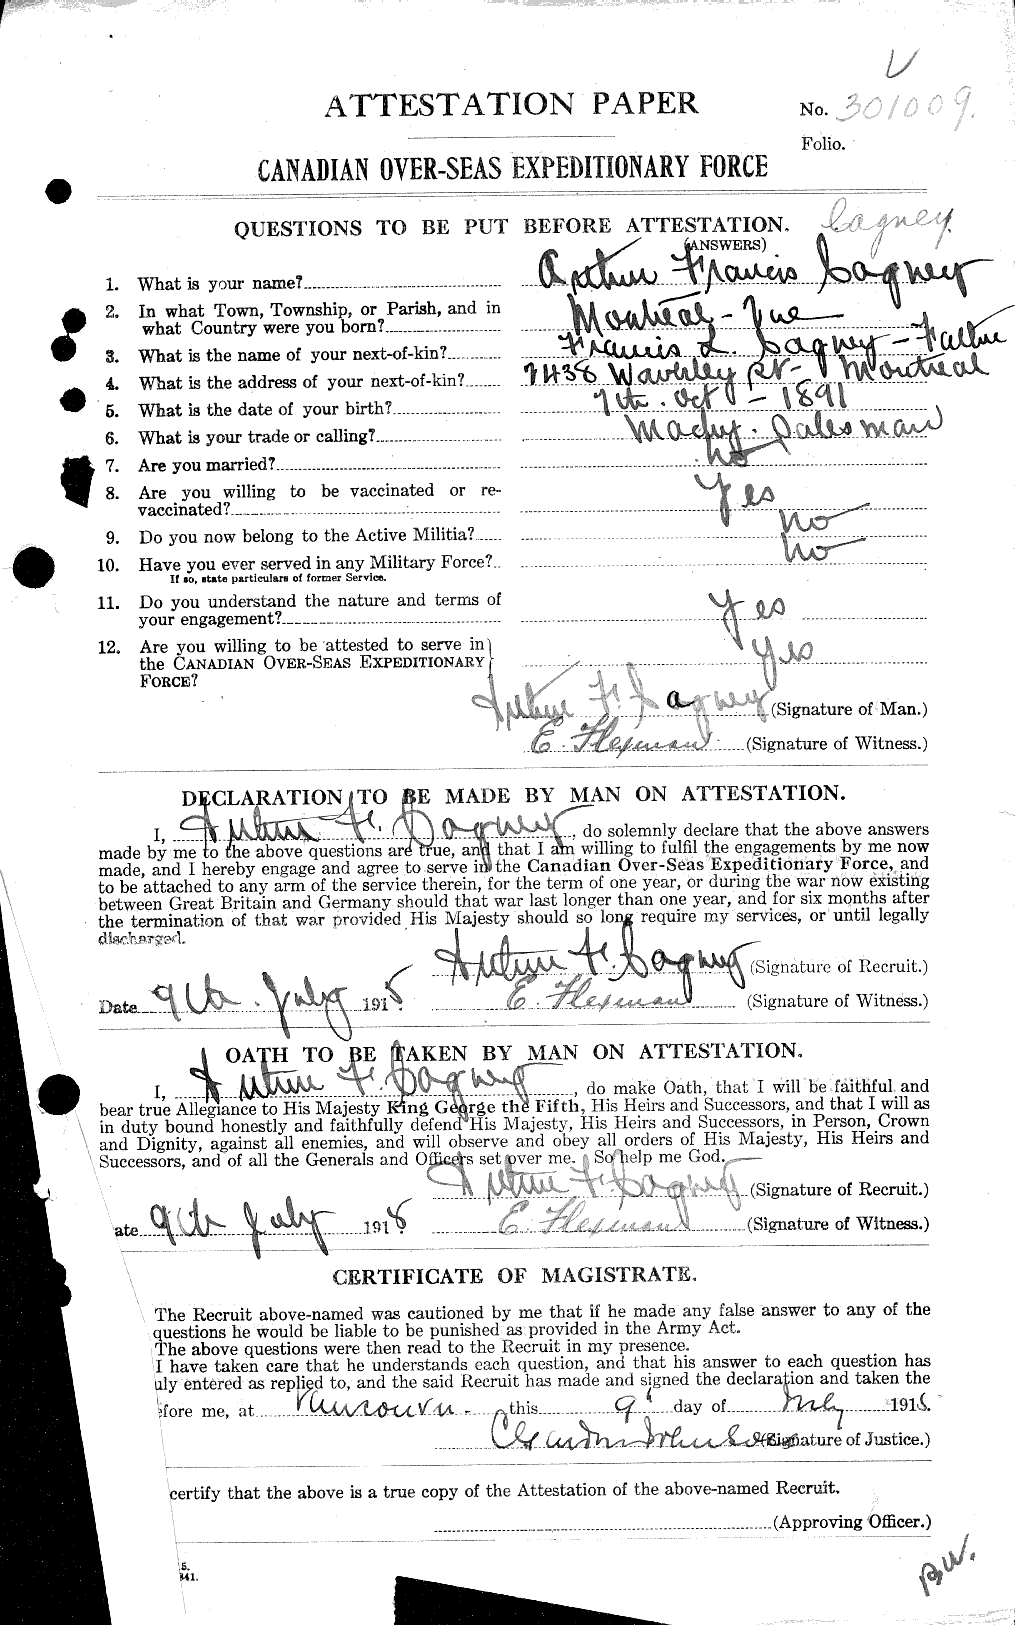 Personnel Records of the First World War - CEF 000216a